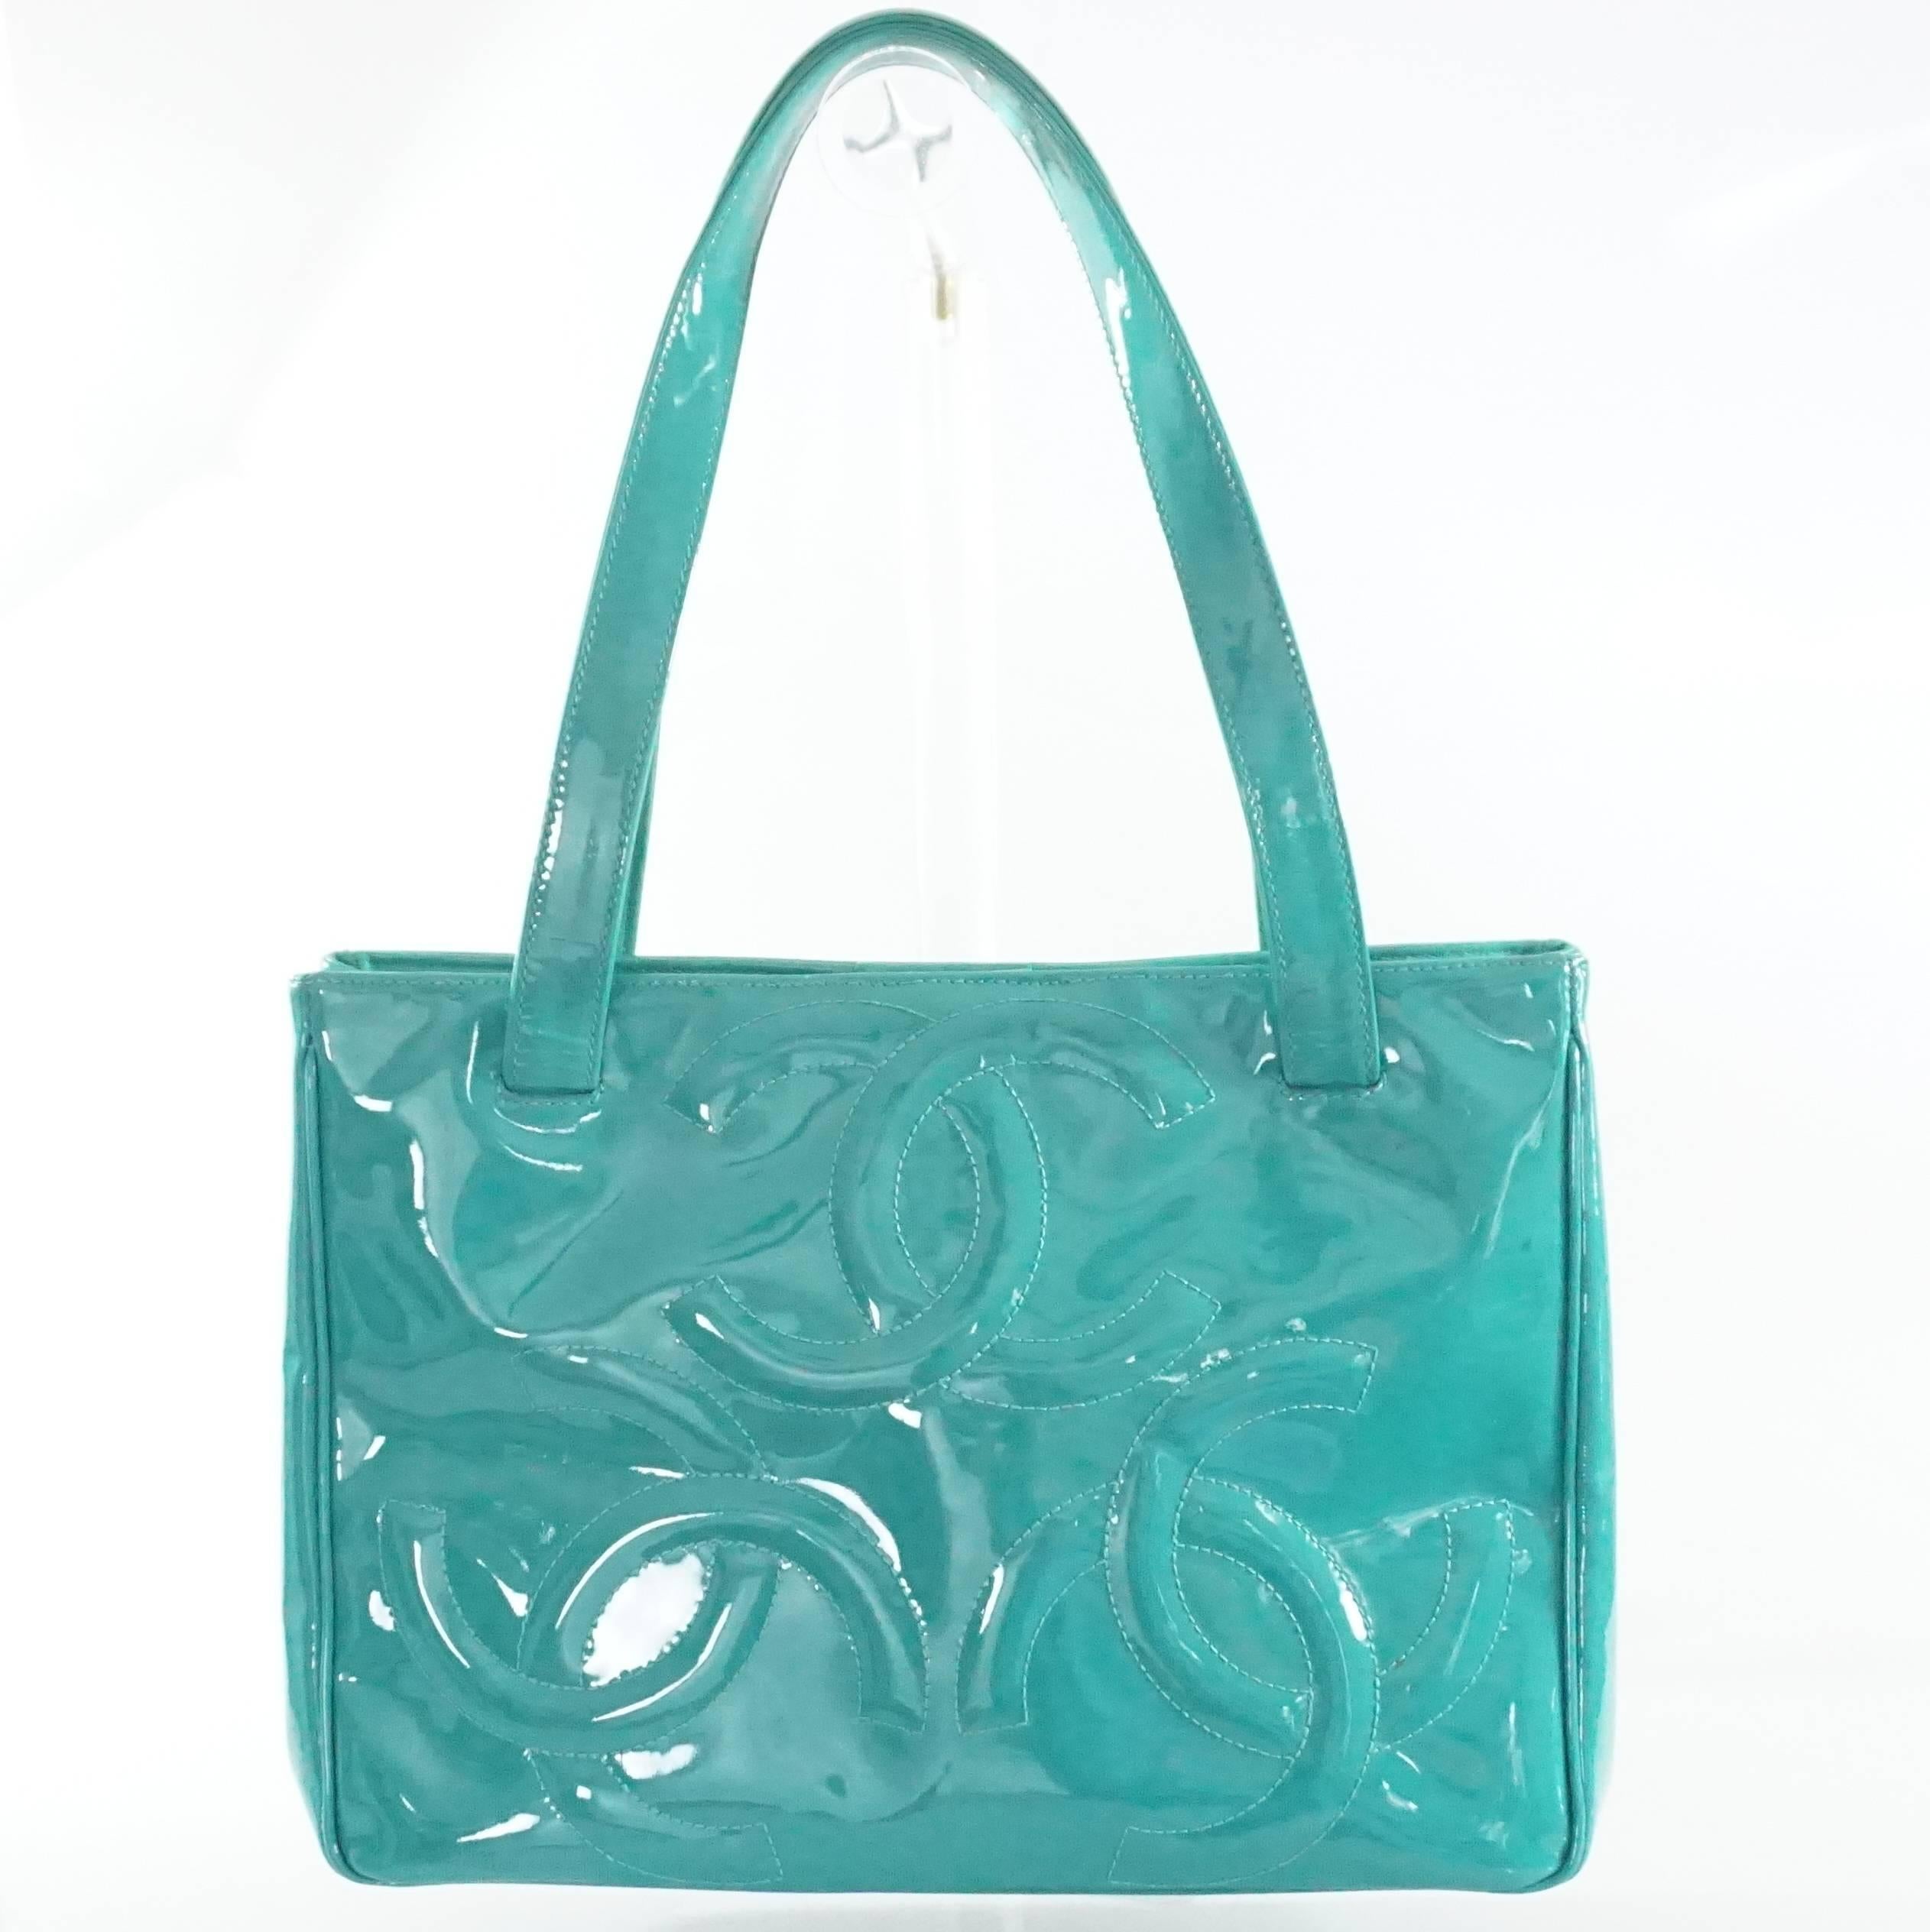 Blue Chanel Teal Patent Mini Tote with CC Logo - 2004-2005